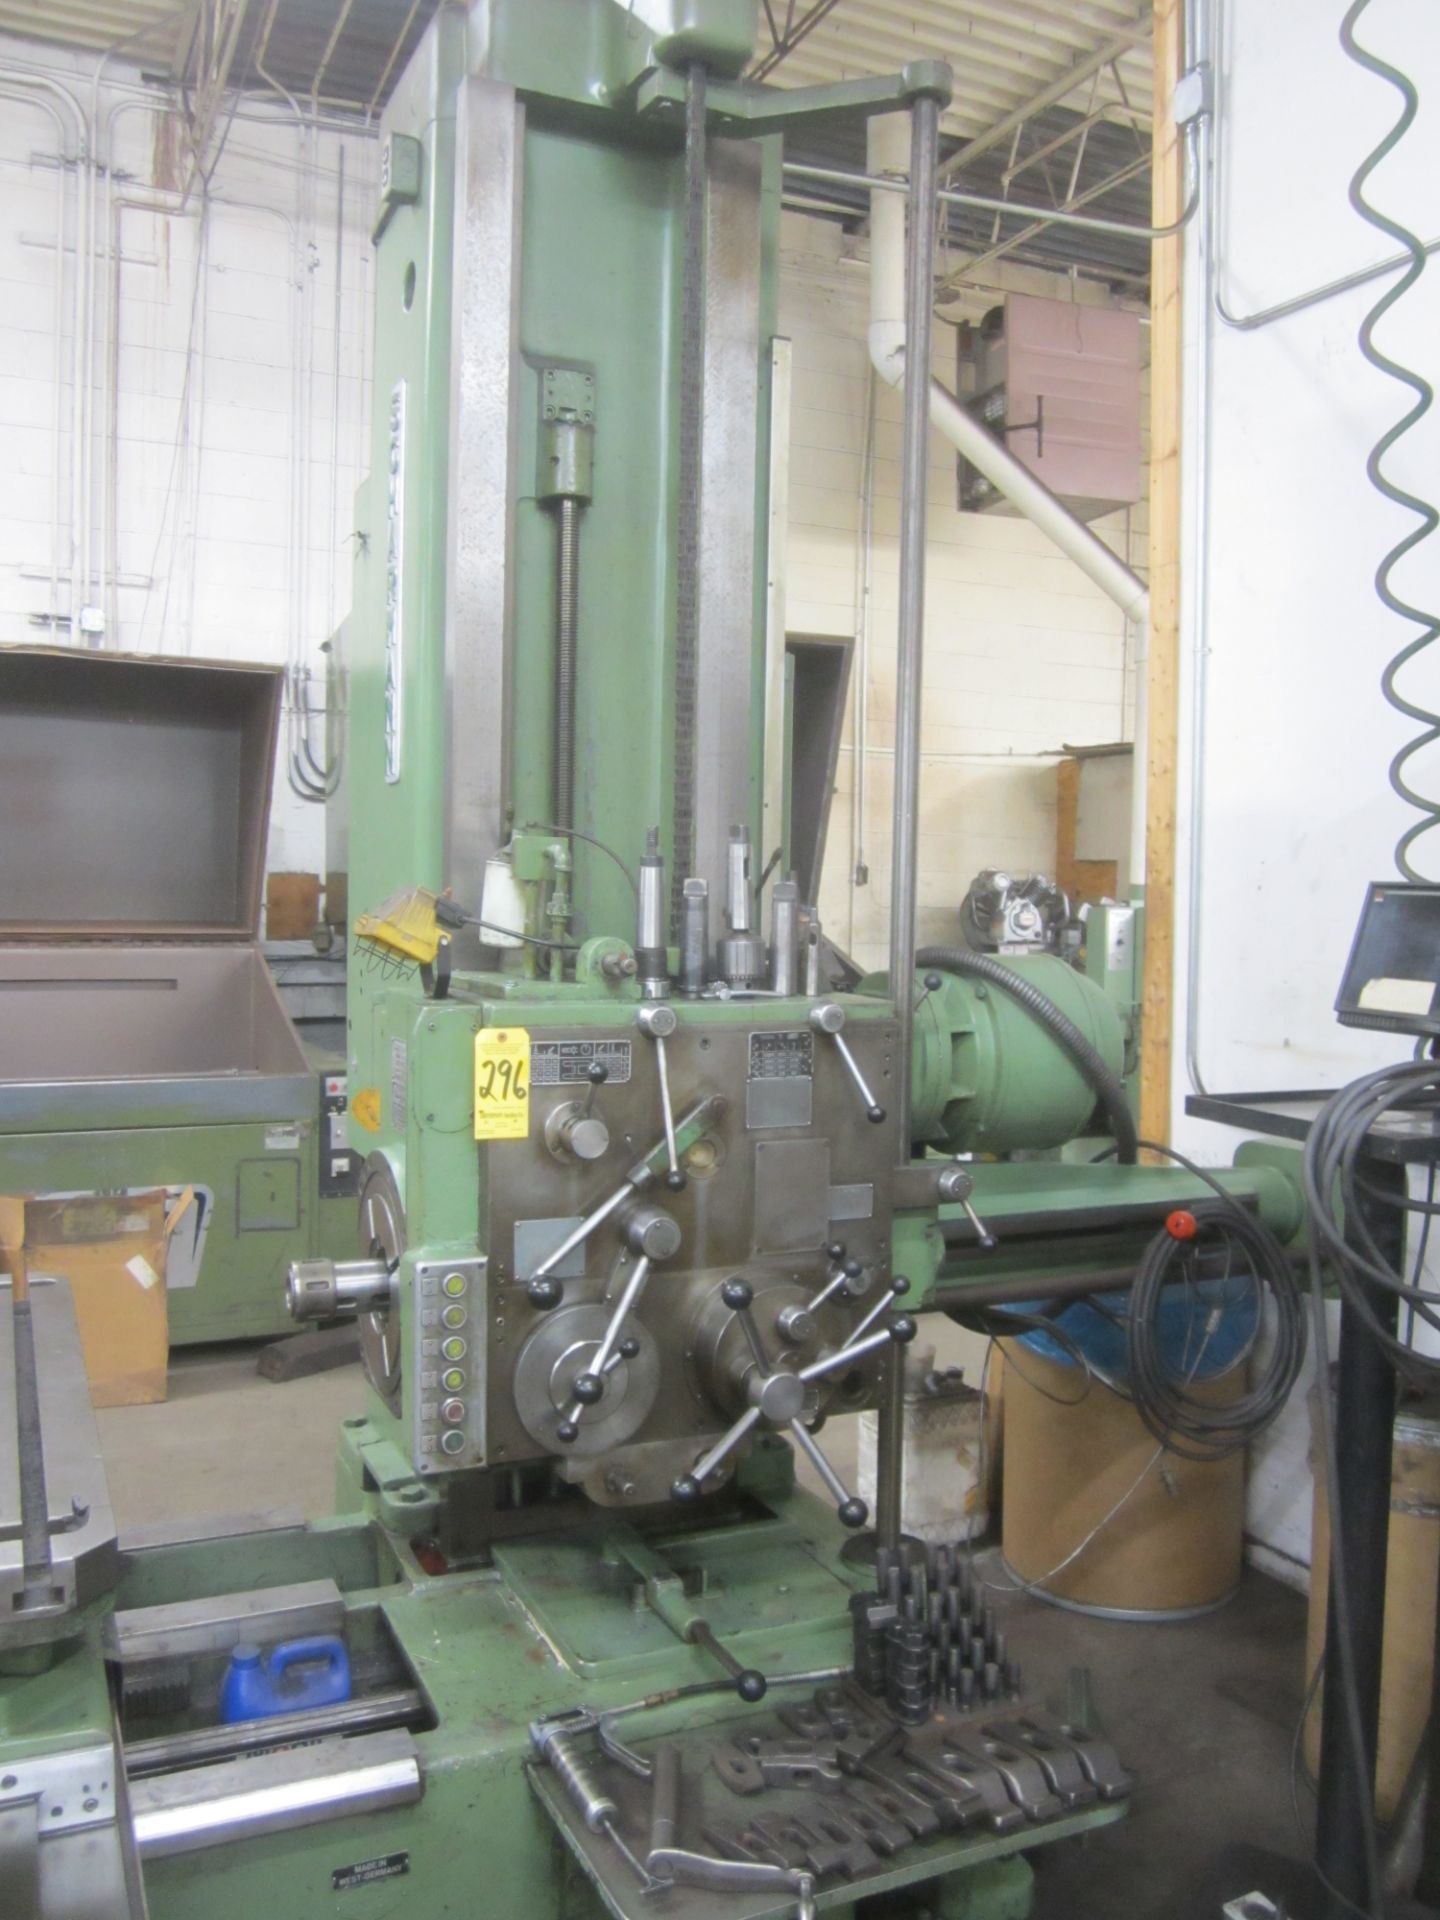 Scharmann 3" Horizontal Boring Mill, s/n 7146, 44" X 48" Power Rotary Table, Outboard Support, 51" - Image 2 of 9